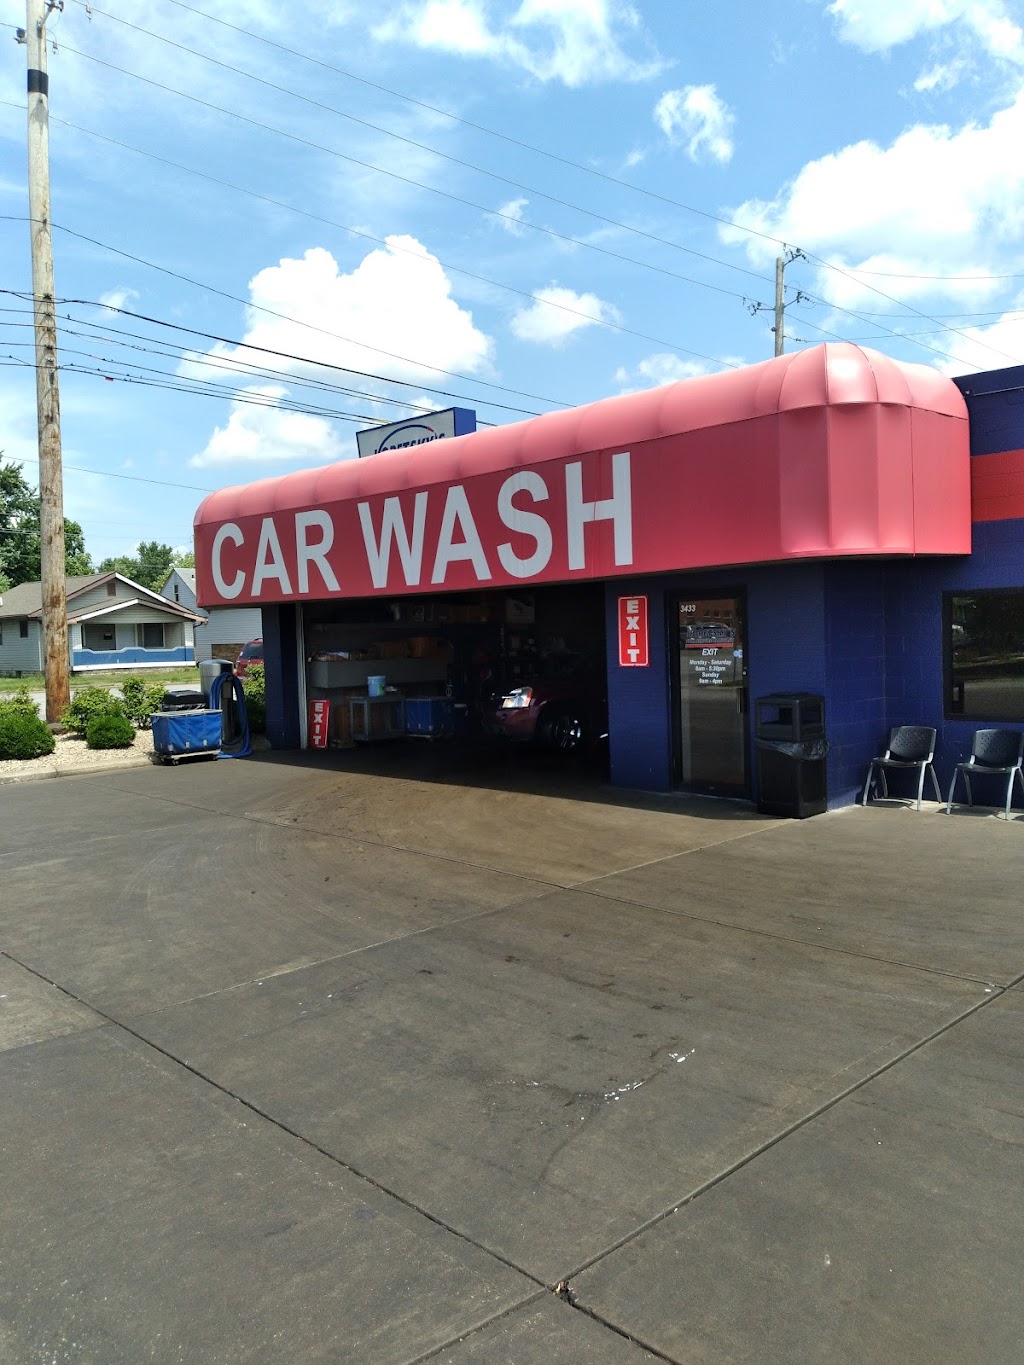 Kopetskys Full Service Car Wash | 3433 W 16th St #2646, Indianapolis, IN 46222, USA | Phone: (317) 632-6878